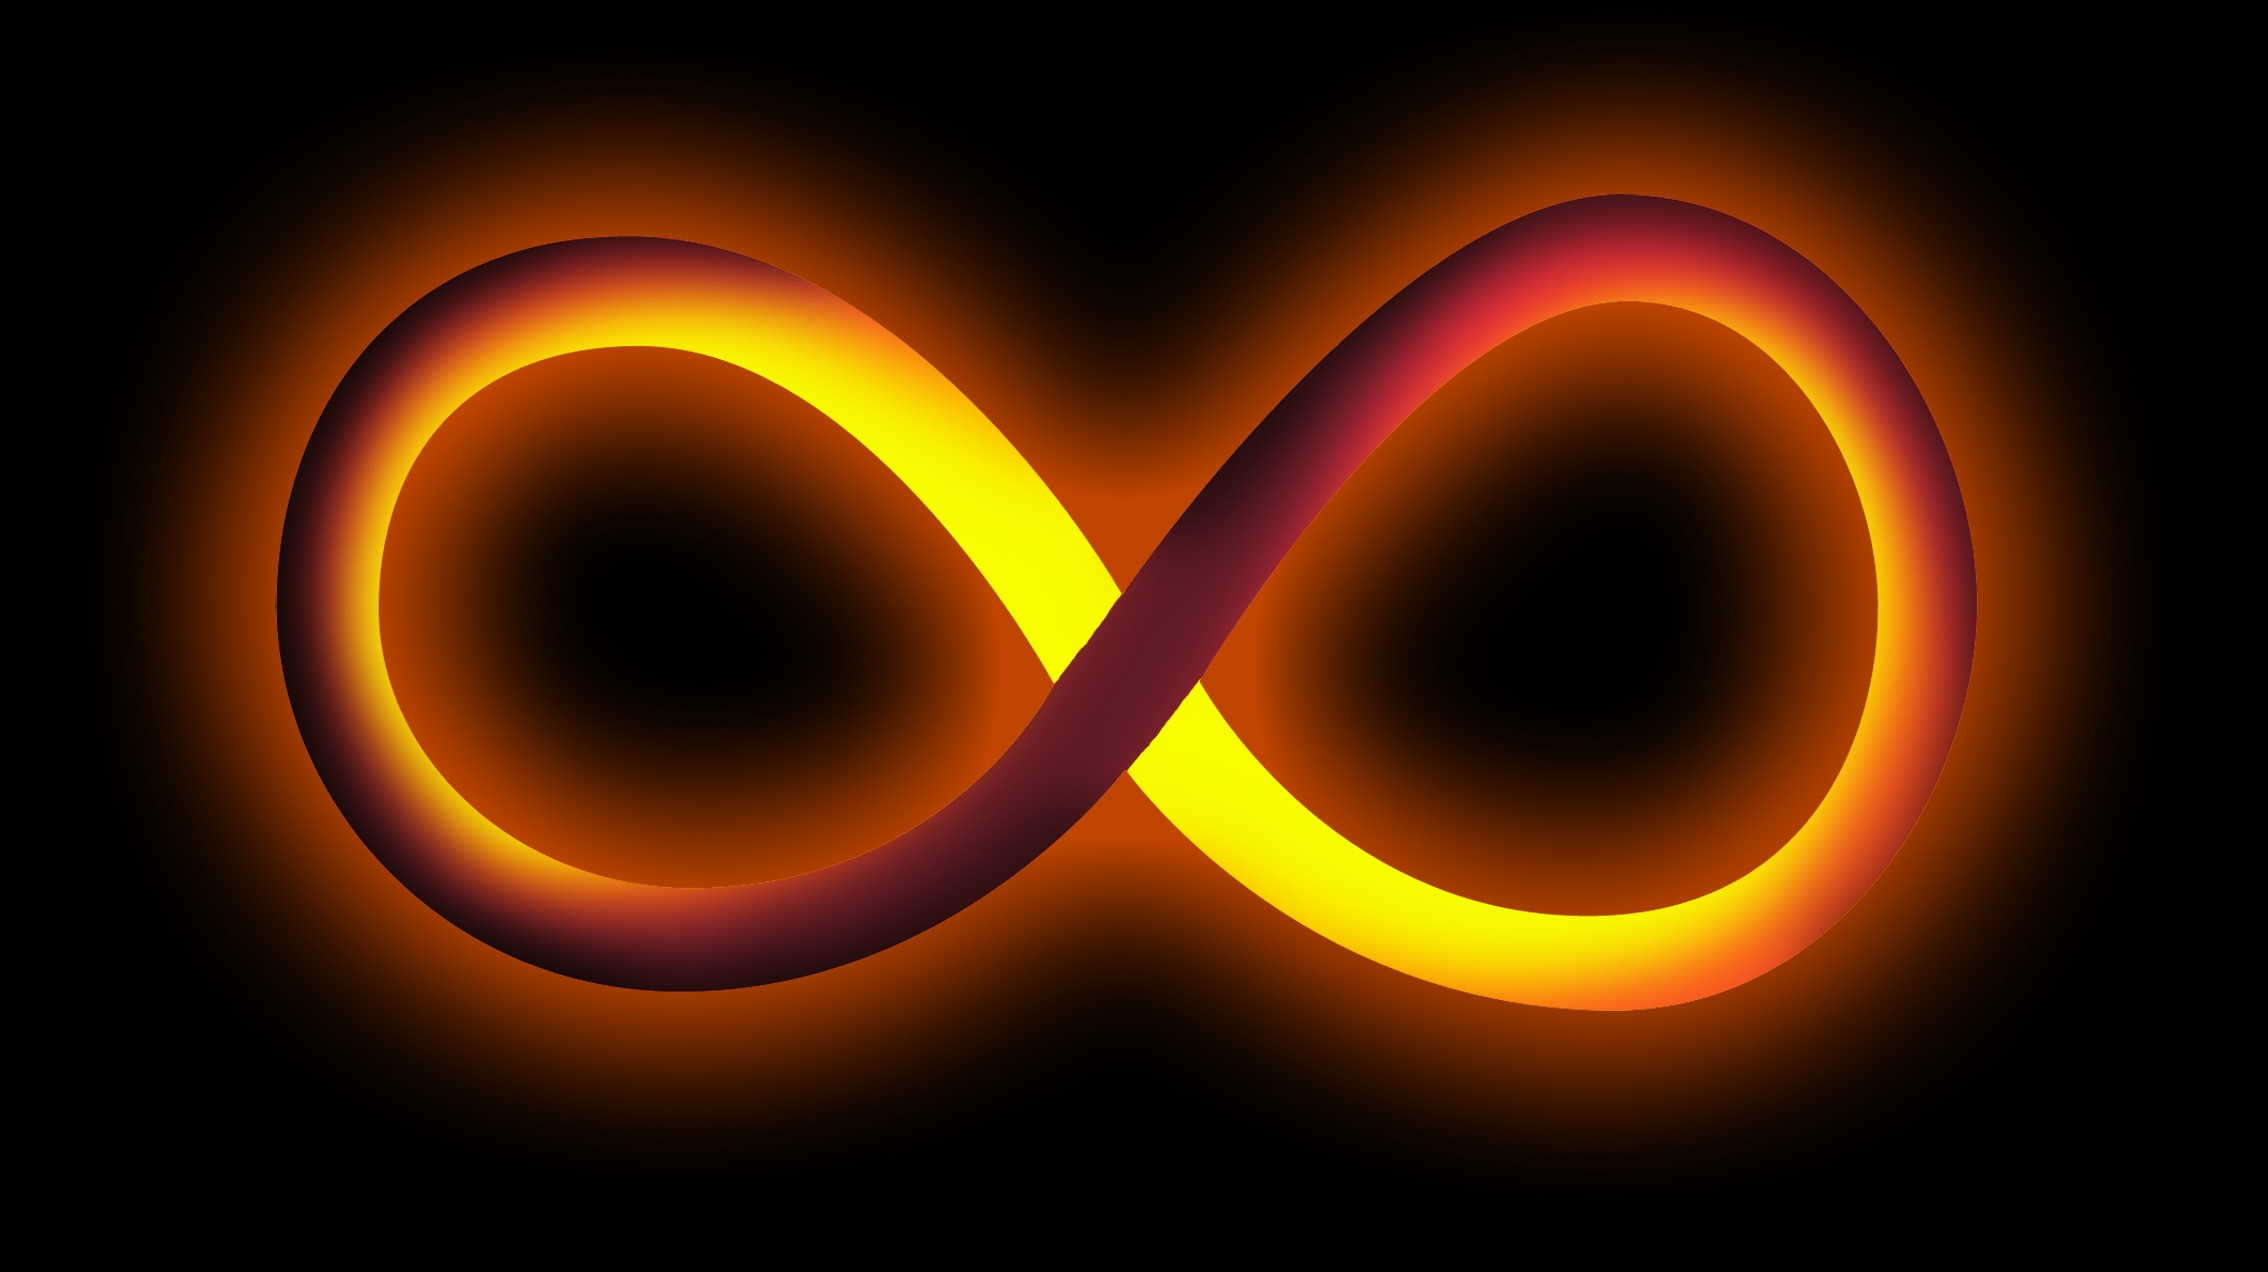 Cool infinity wallpapers, Endless appeal, Boundless creativity, Infinite possibilities, 2270x1280 HD Desktop